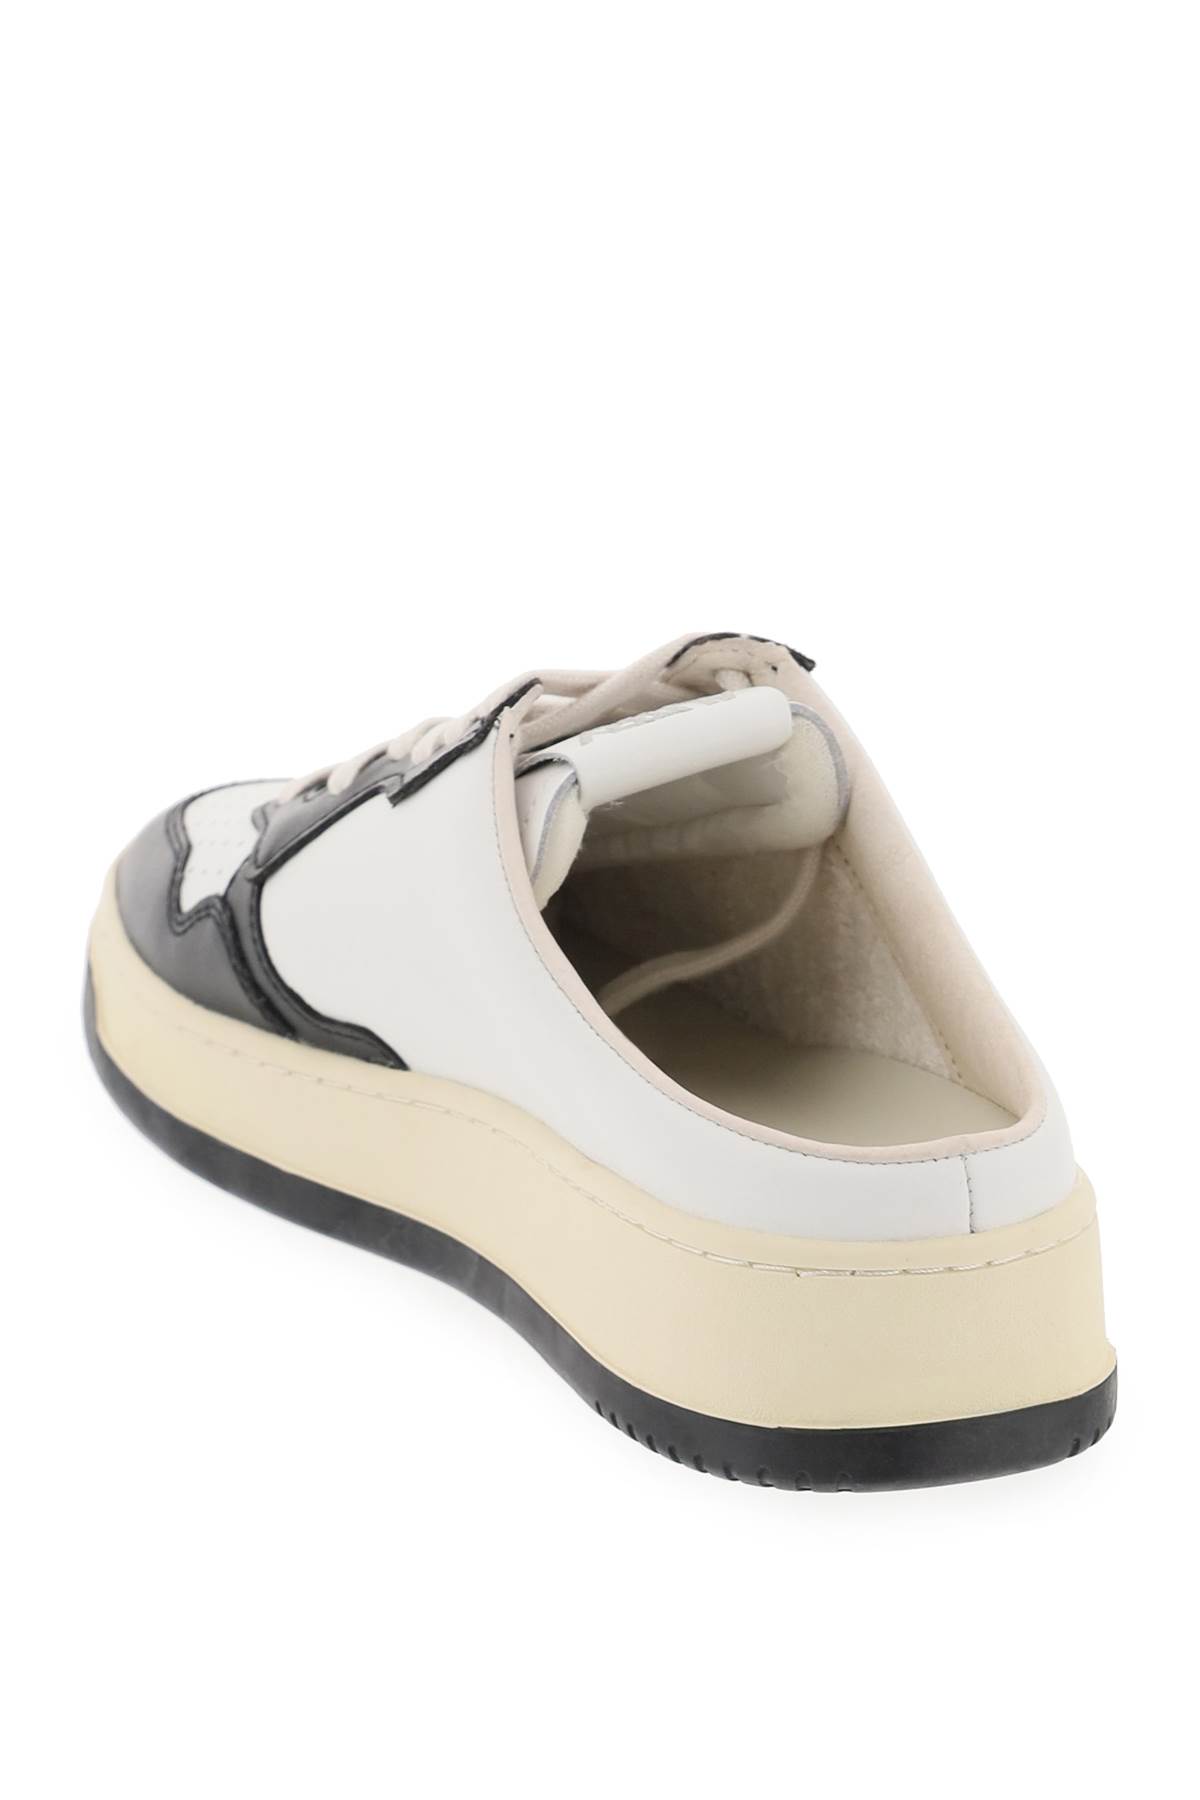 Shop Autry Medalist Mule Low Sneakers In White Black (white)